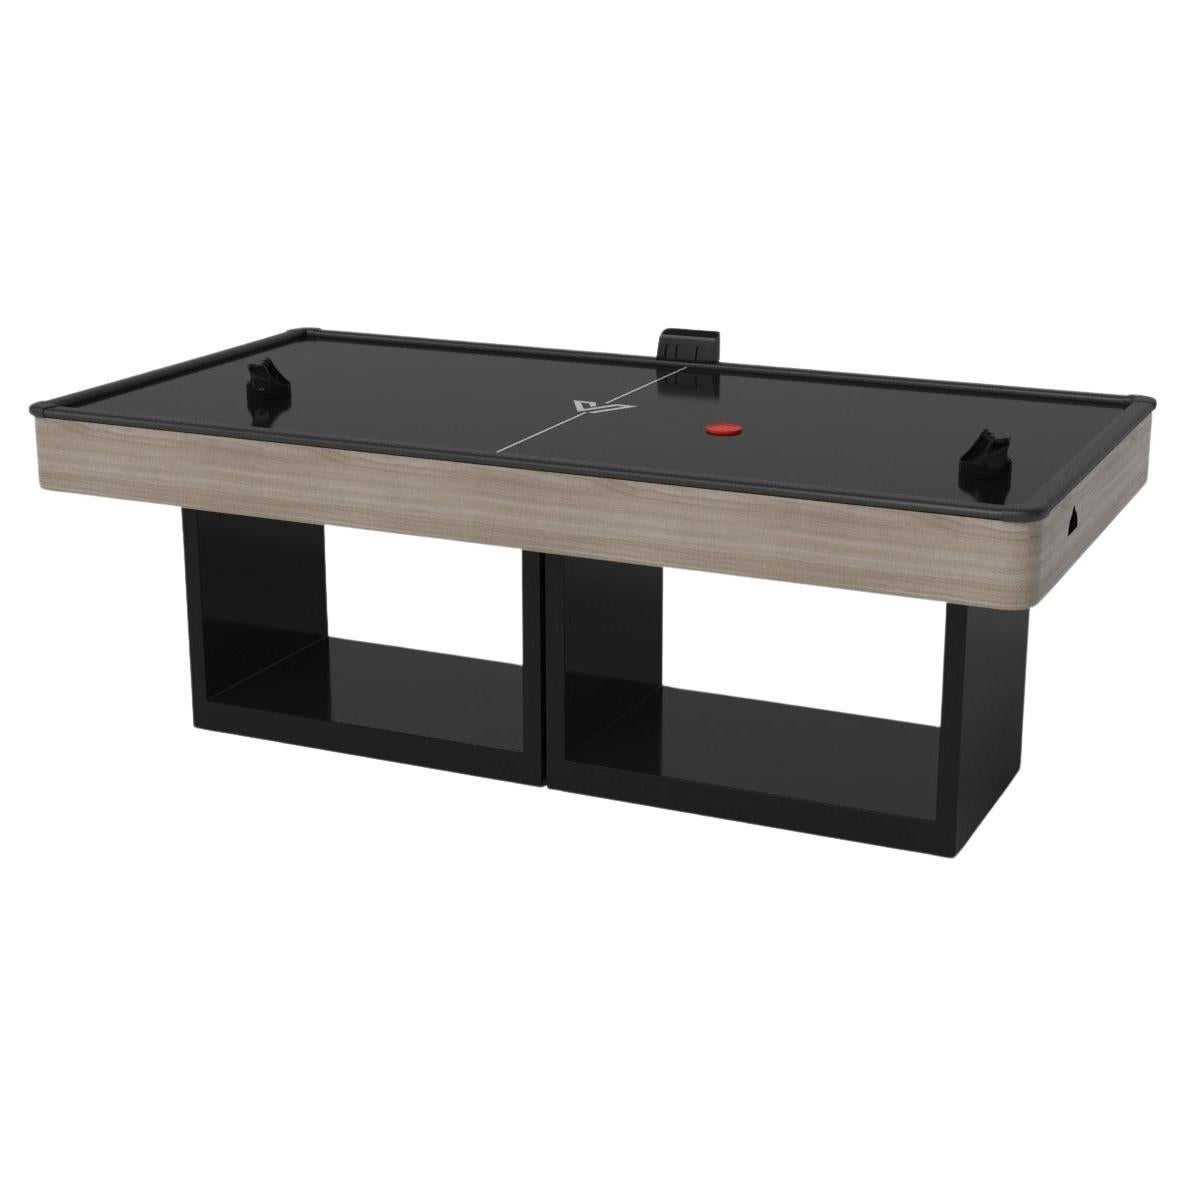 Elevate Customs Ambrosia Air Hockey Table/Solid White Oak Wood in 7'-Made in USA